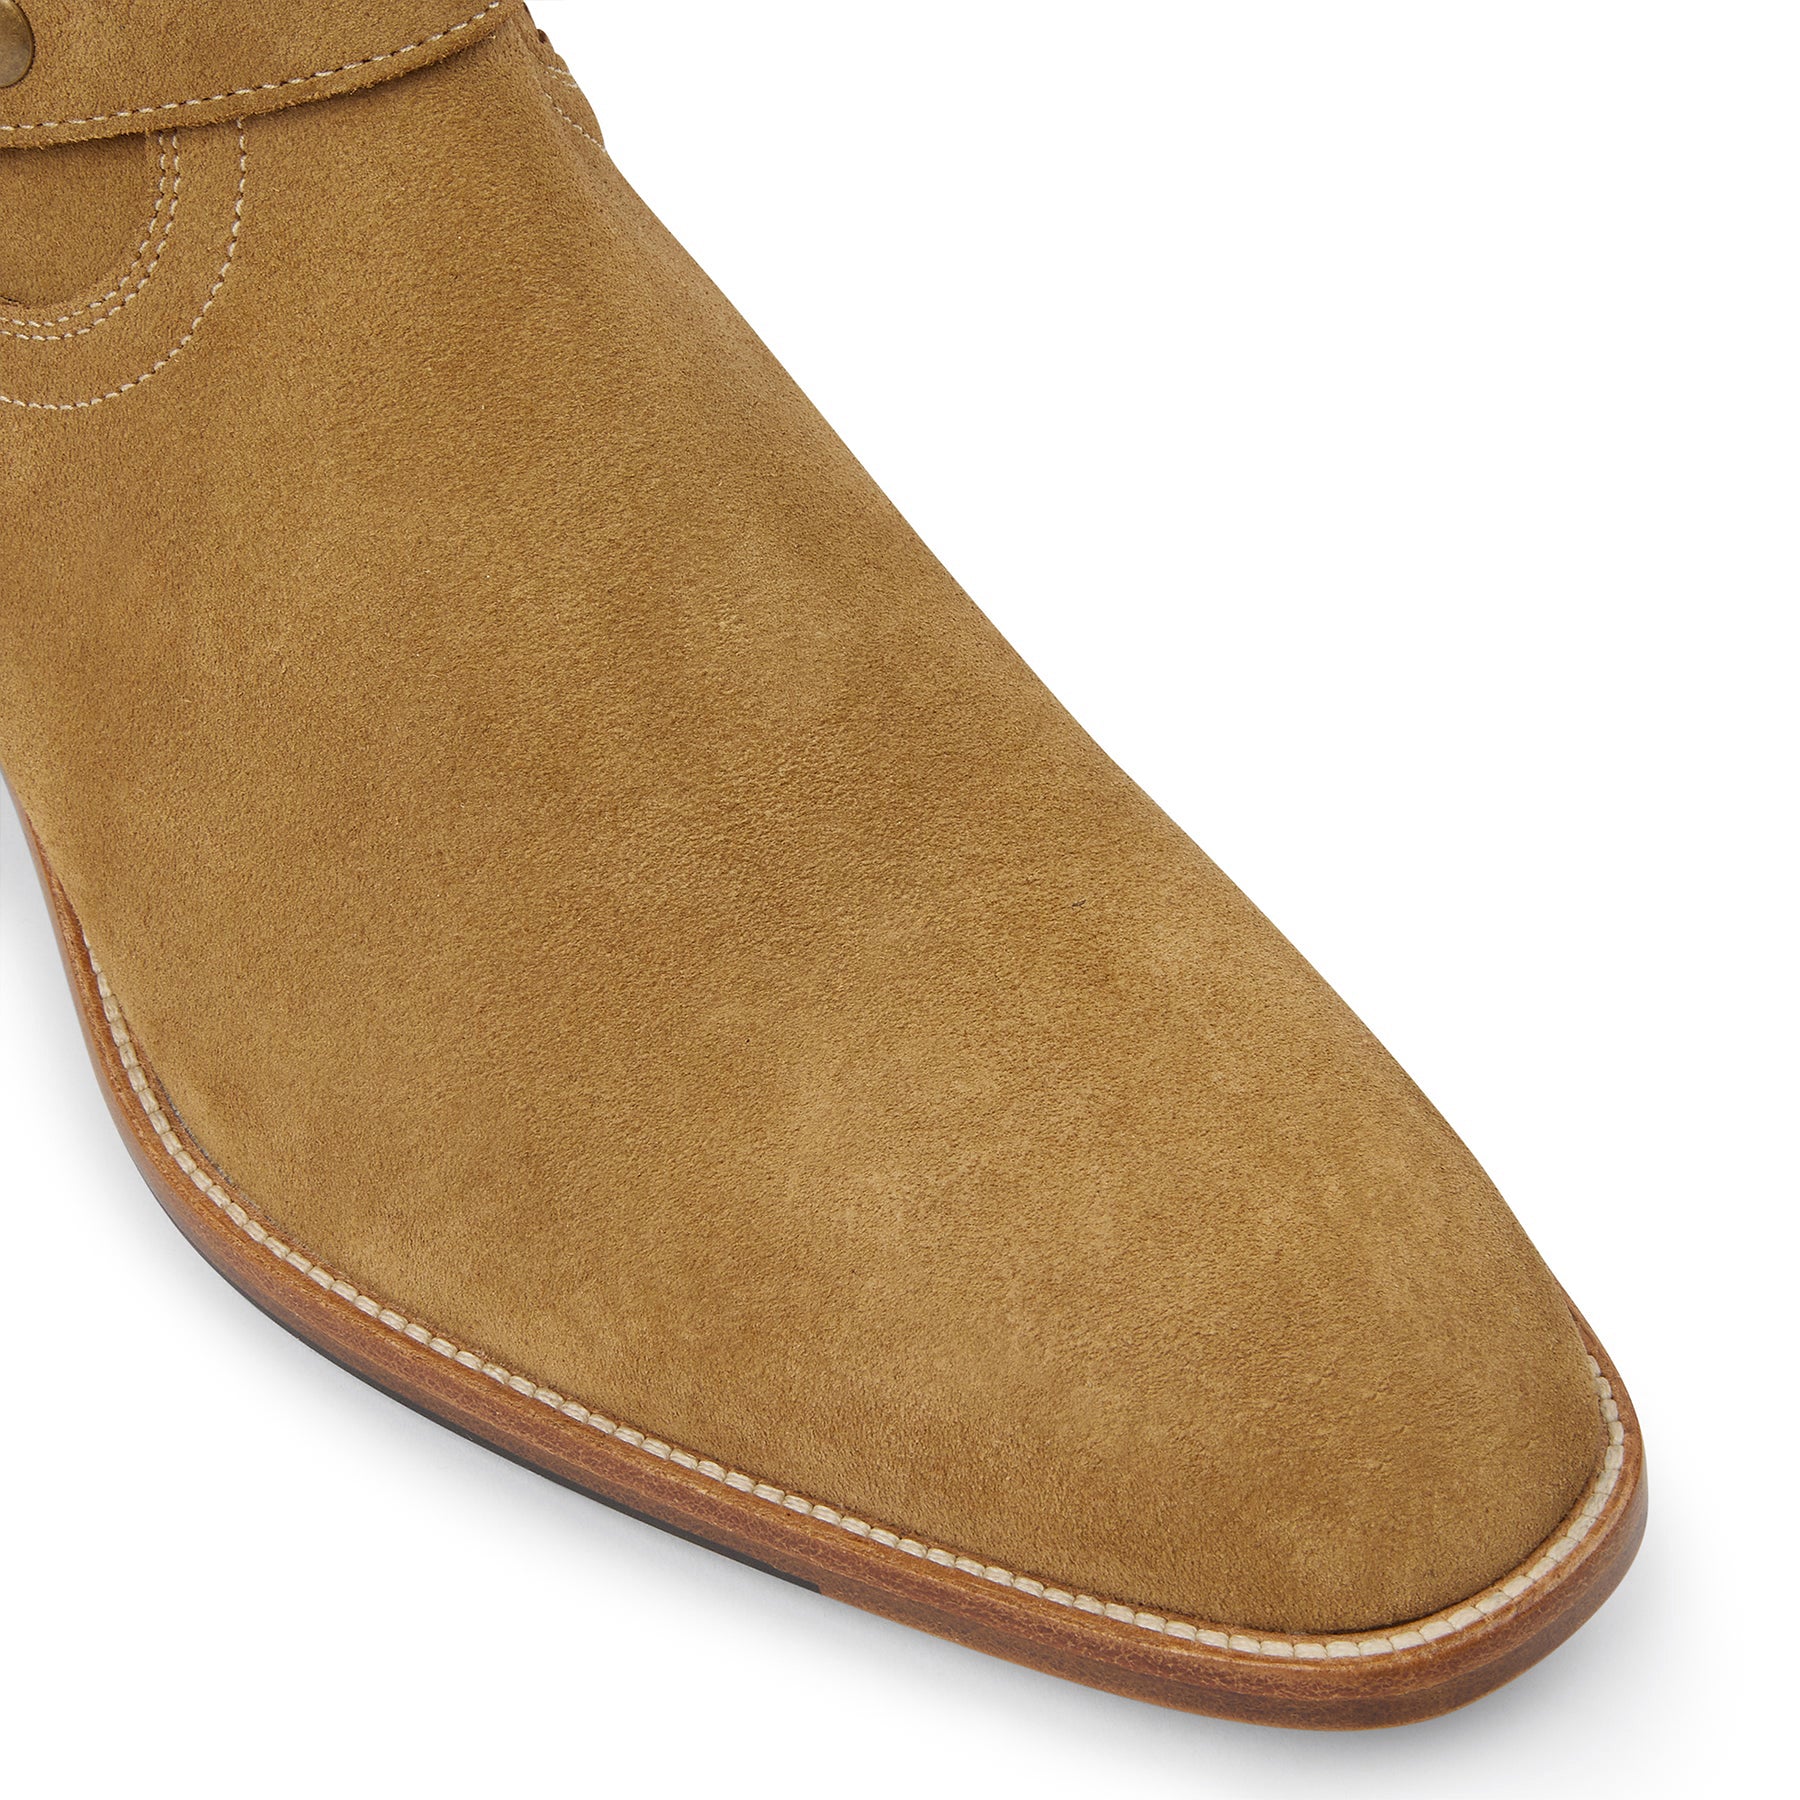 Harness Zip Boot - Camel Suede Leather